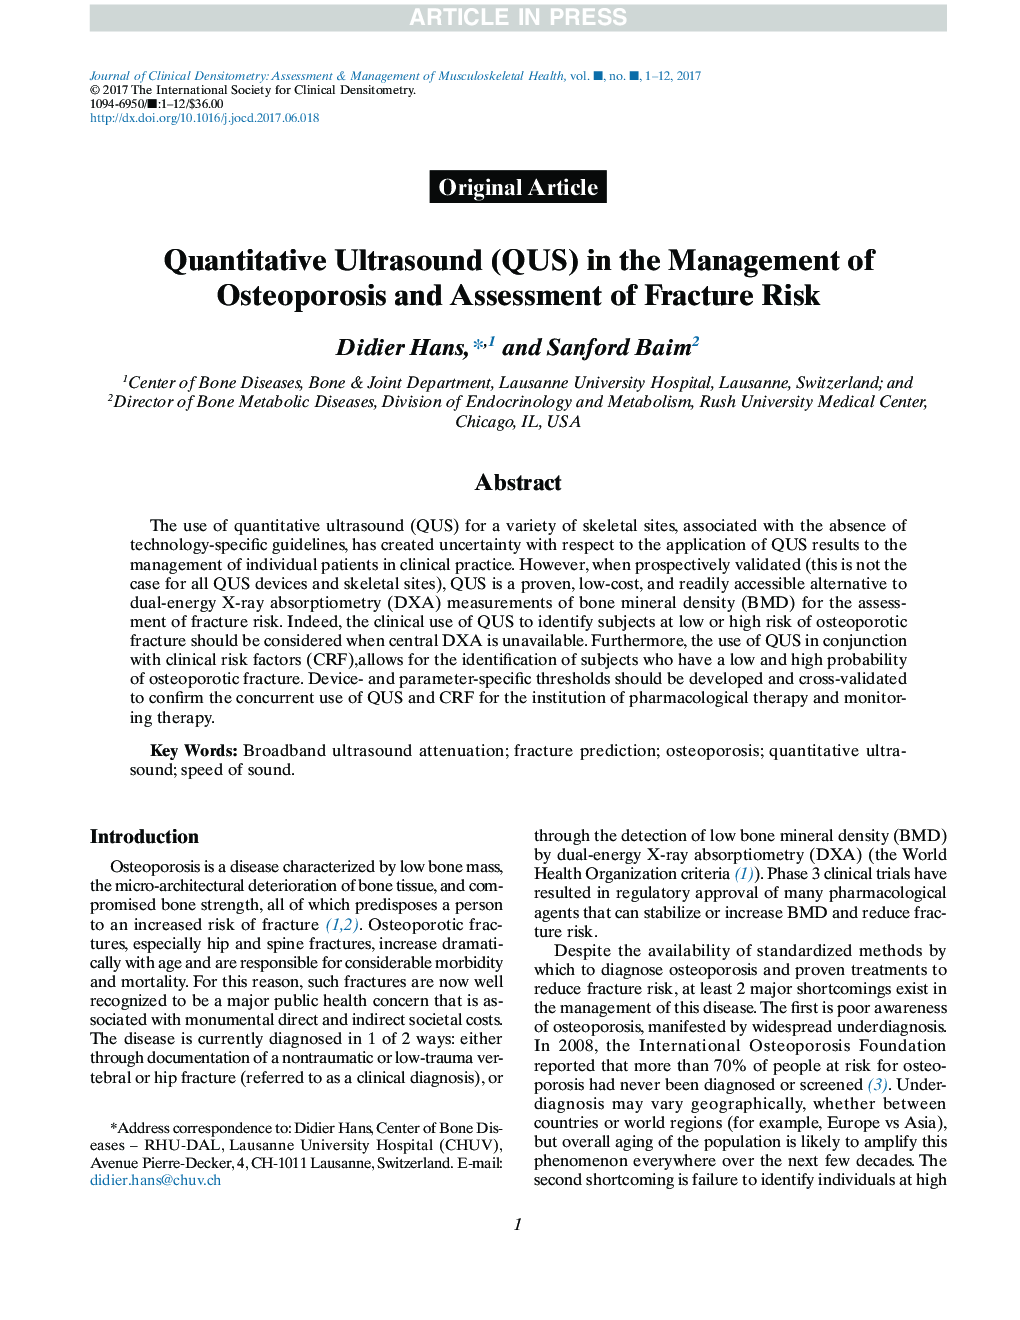 Quantitative Ultrasound (QUS) in the Management of Osteoporosis and Assessment of Fracture Risk